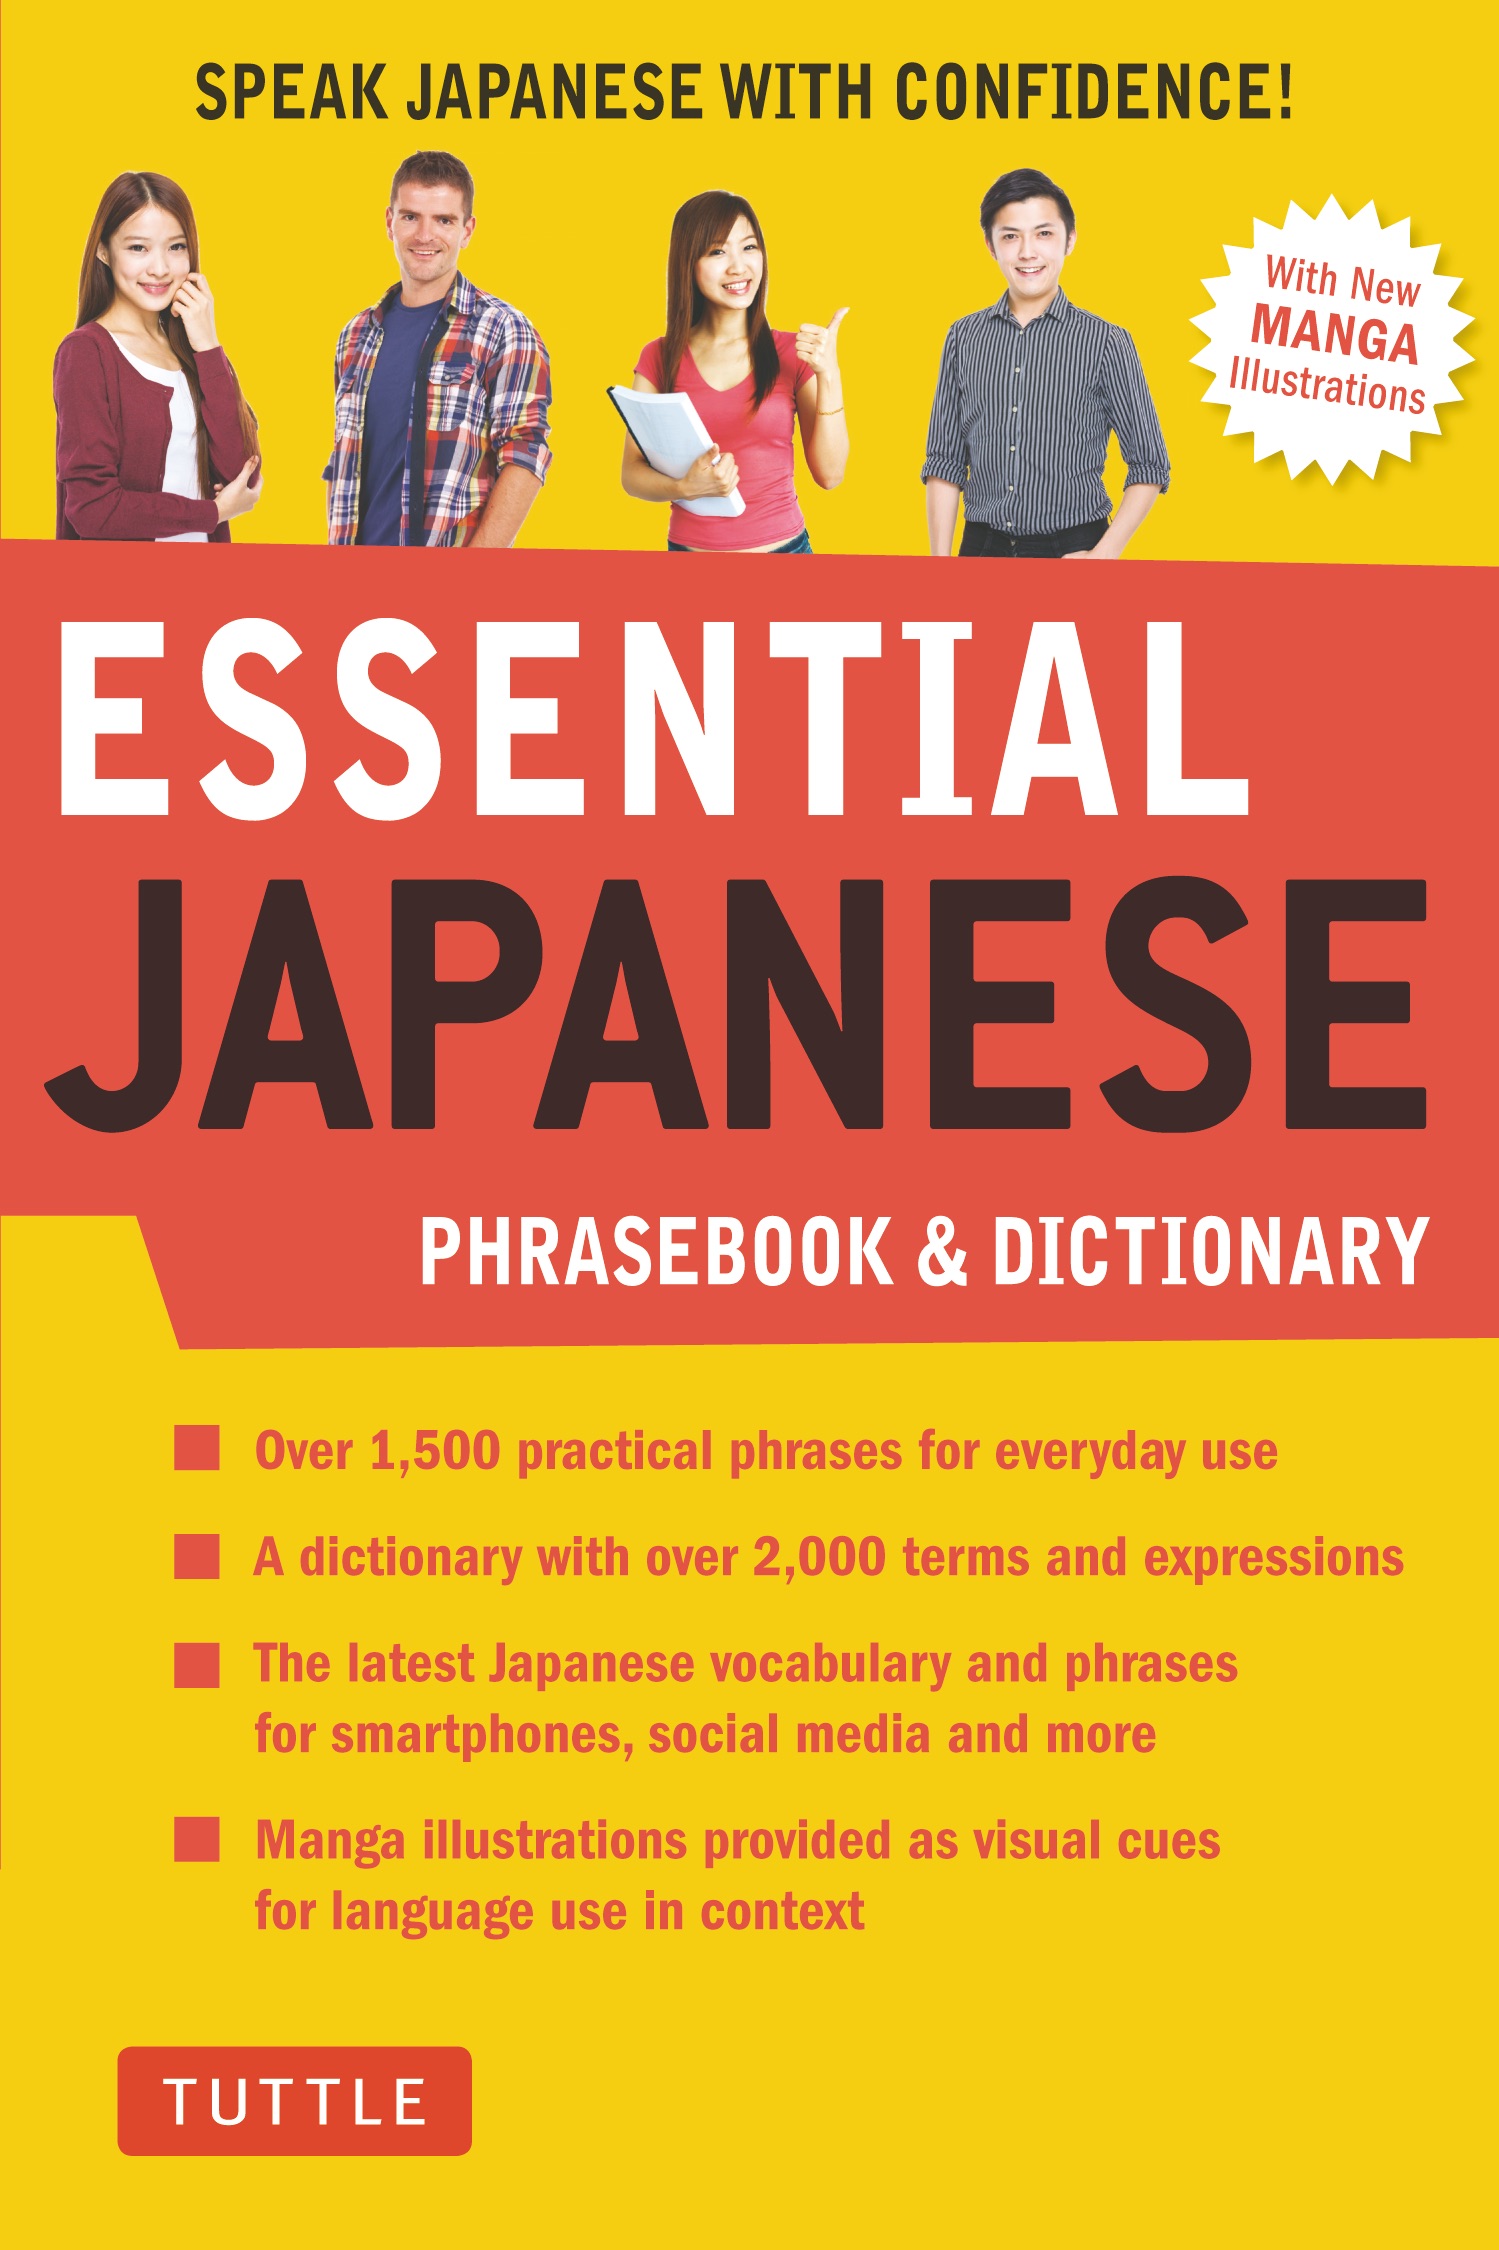 Essential Japanese Phrasebook & Dictionary | NewSouth Books